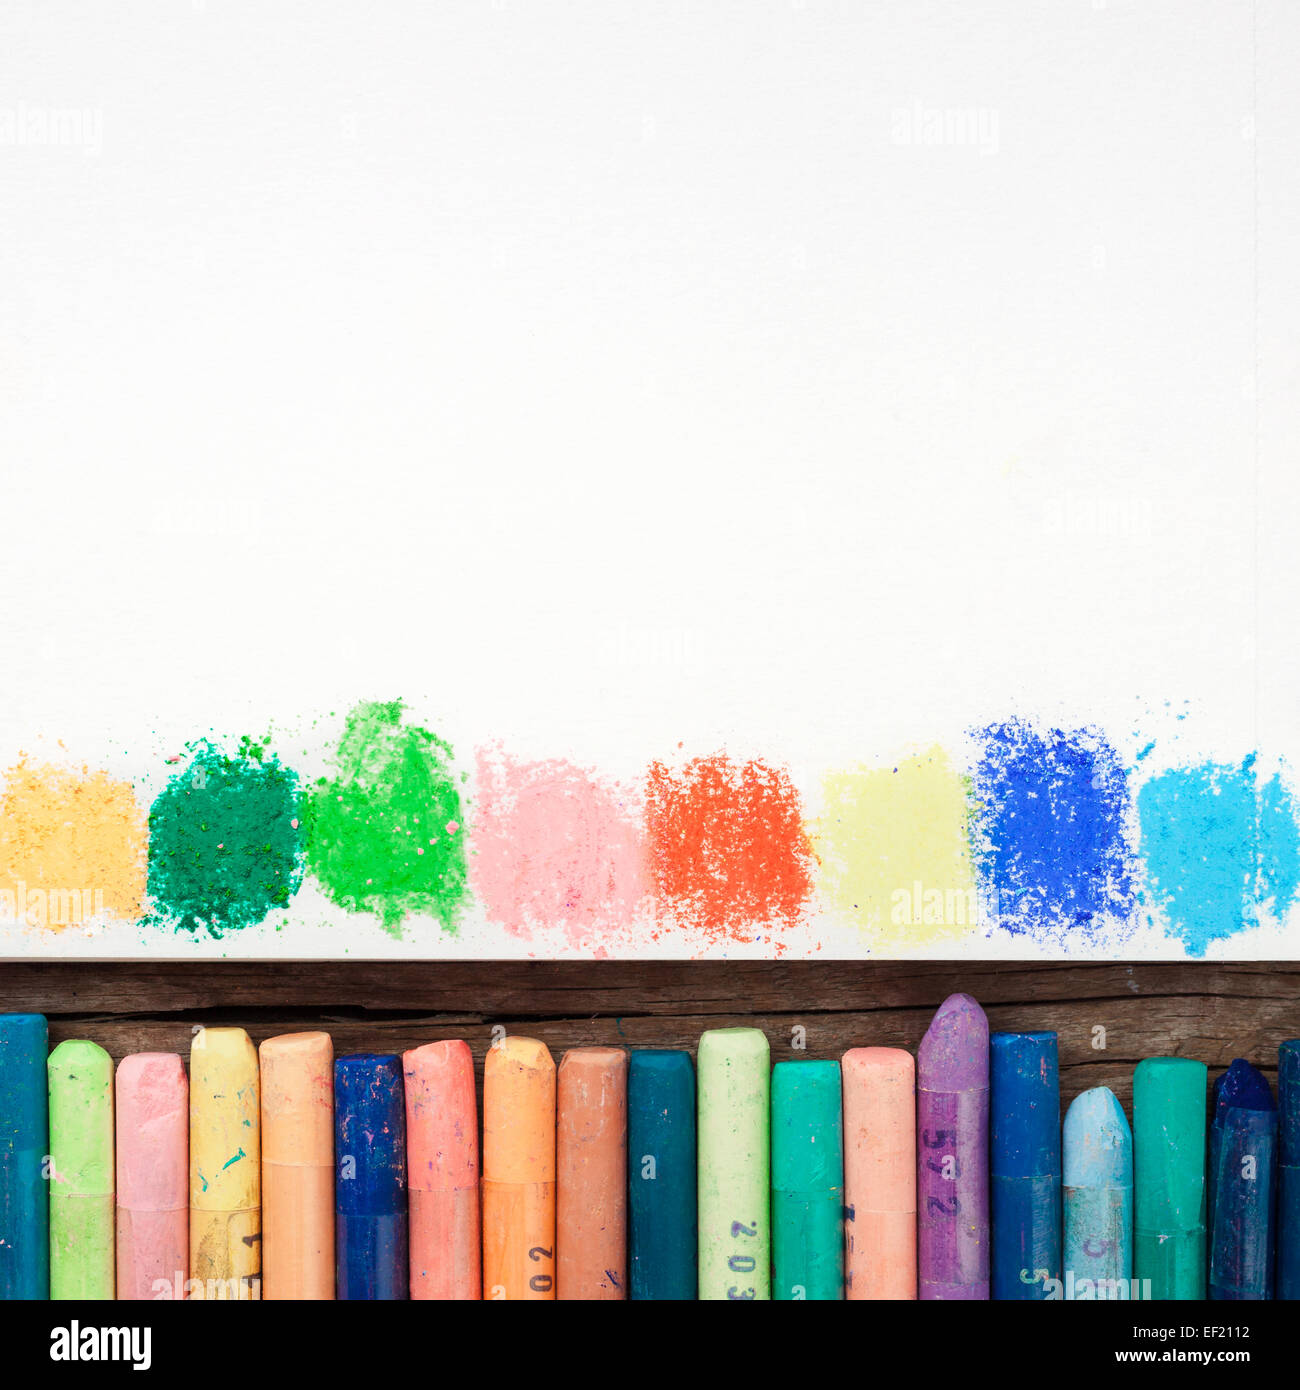 Coloring Crayons Arranged In Rainbow Line Stock Photo by ©radub85